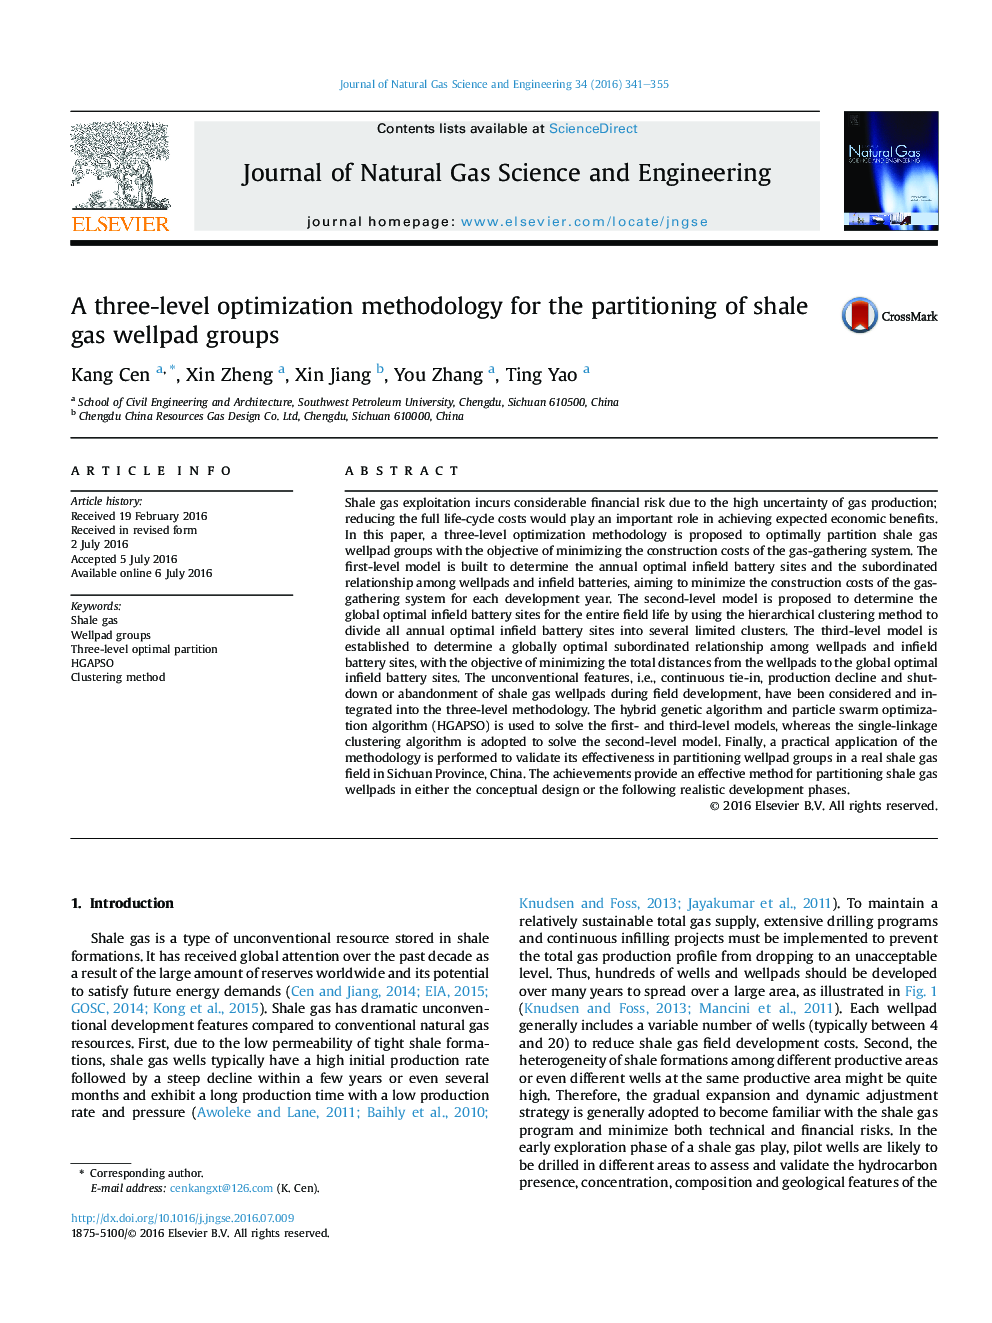 A three-level optimization methodology for the partitioning of shale gas wellpad groups